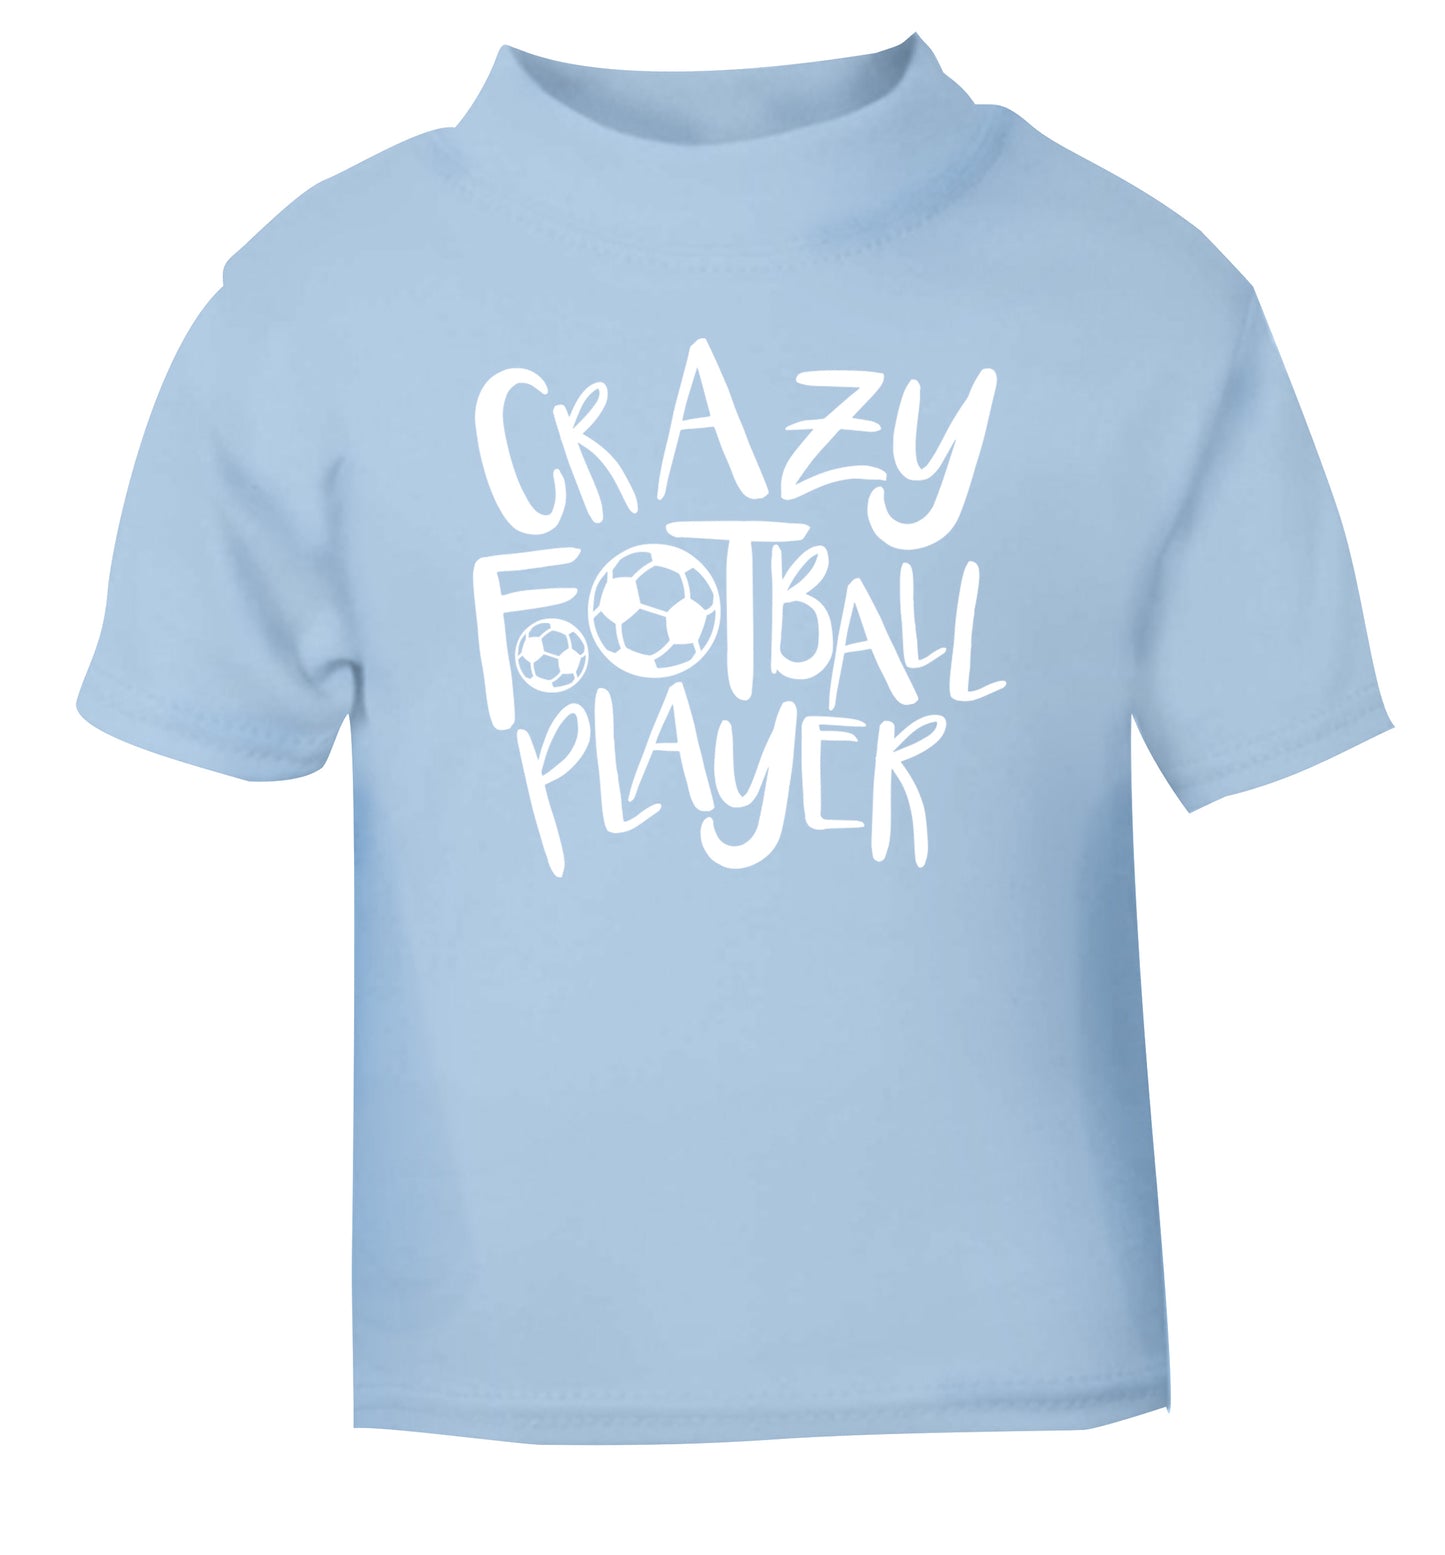 Crazy football player light blue Baby Toddler Tshirt 2 Years